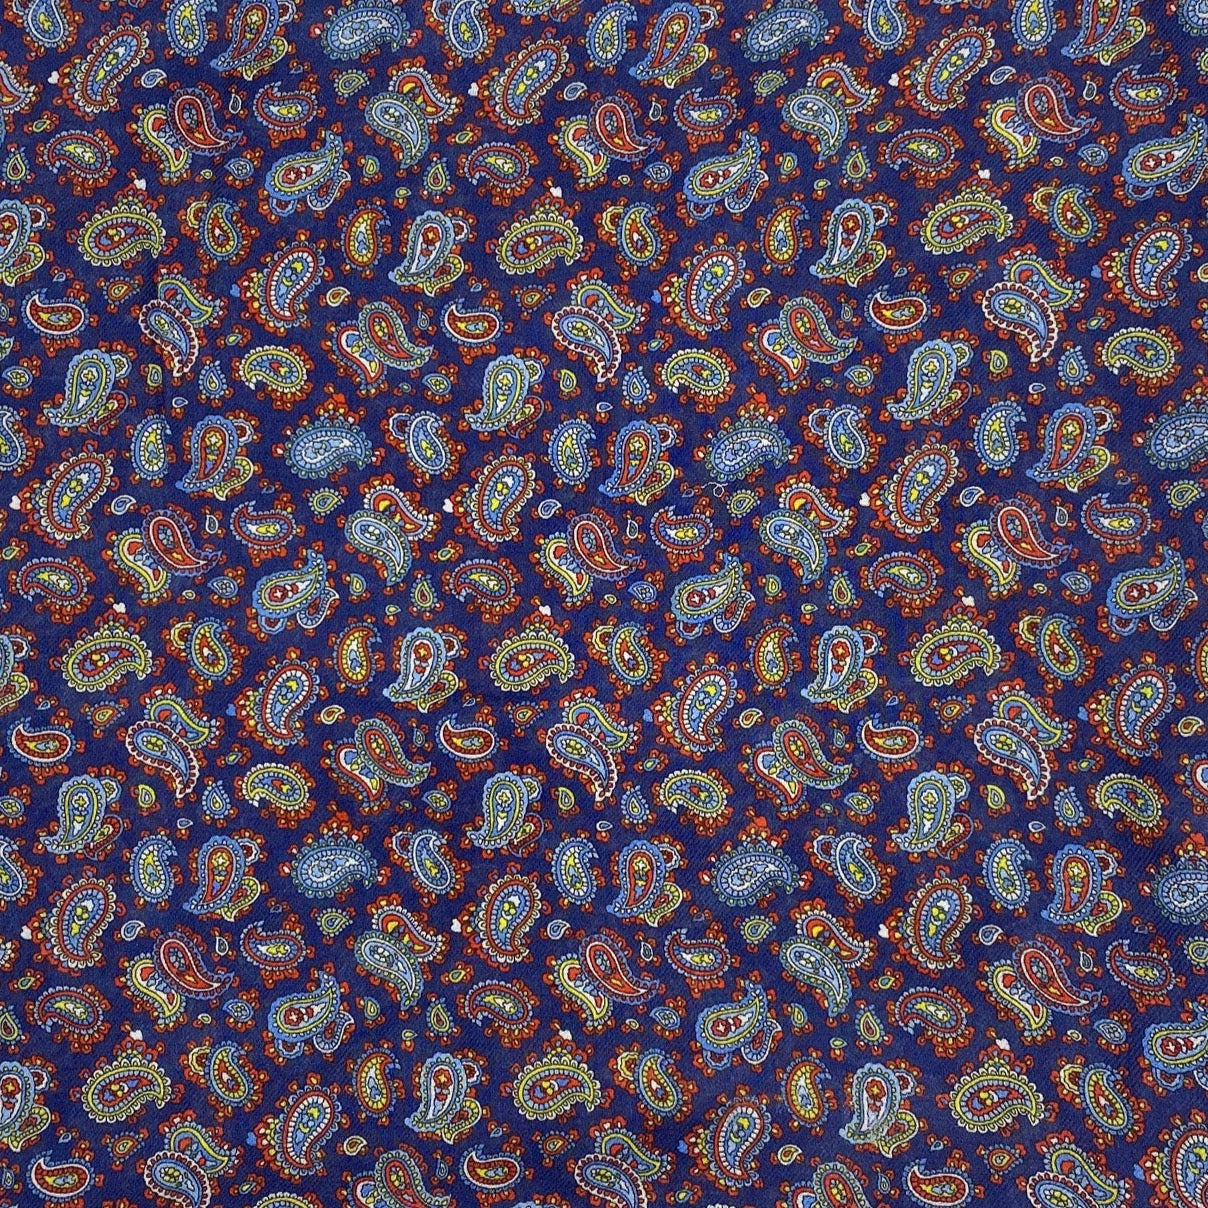 A flat, folded view of 'The Lexington' boho wide scarf. Clearly showing the intricate multicoloured paisley patterns on a midnight blue background.